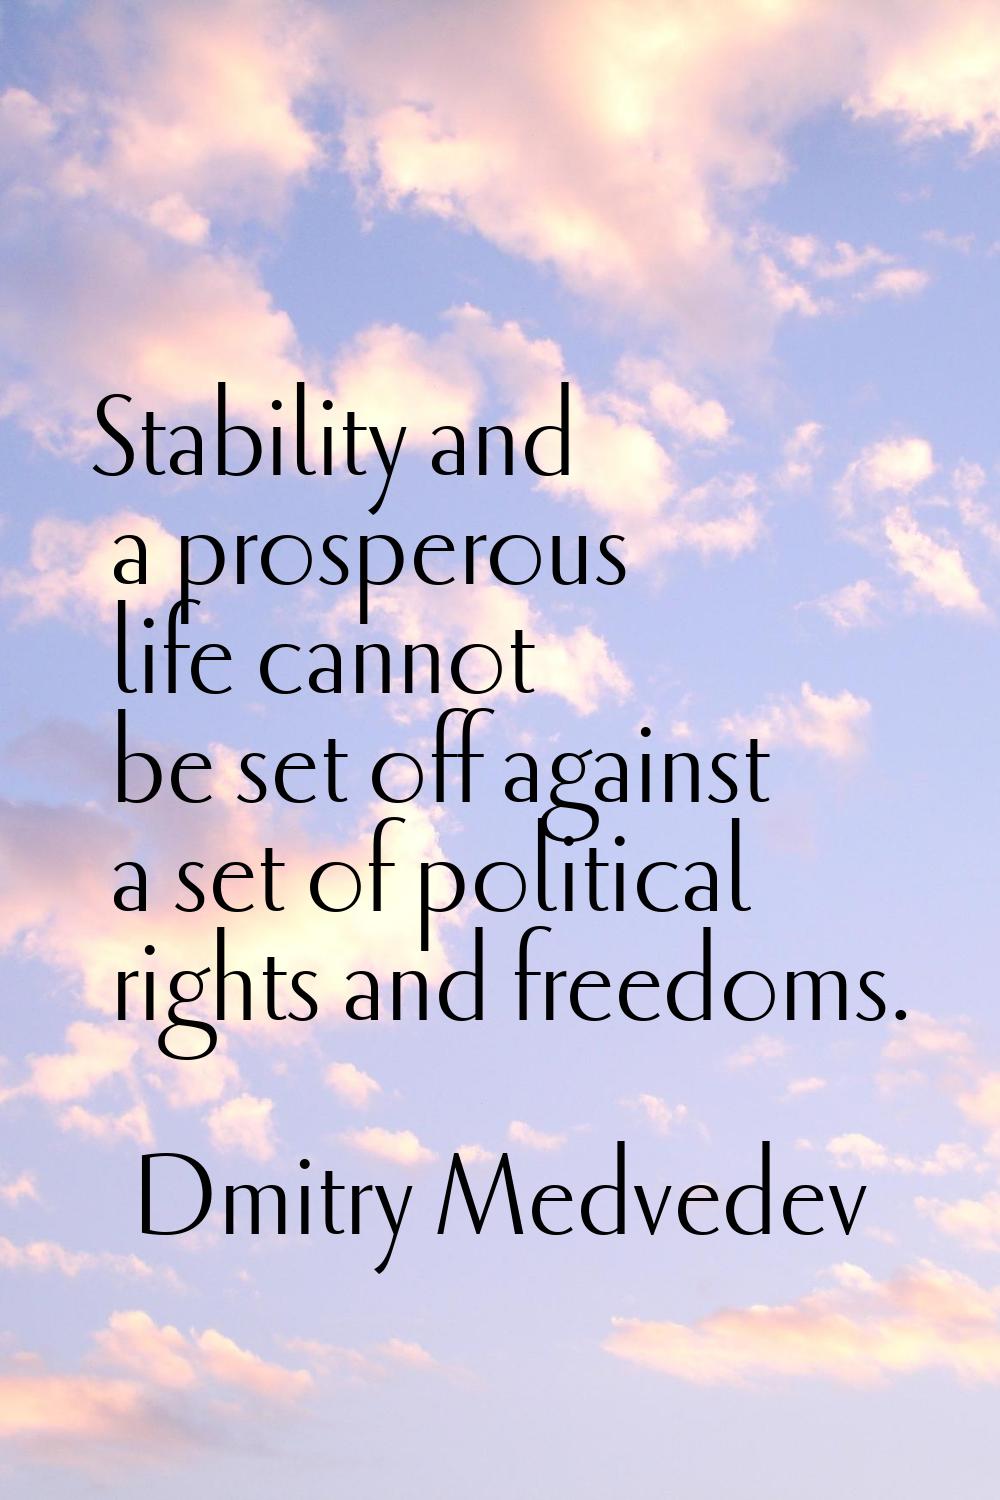 Stability and a prosperous life cannot be set off against a set of political rights and freedoms.